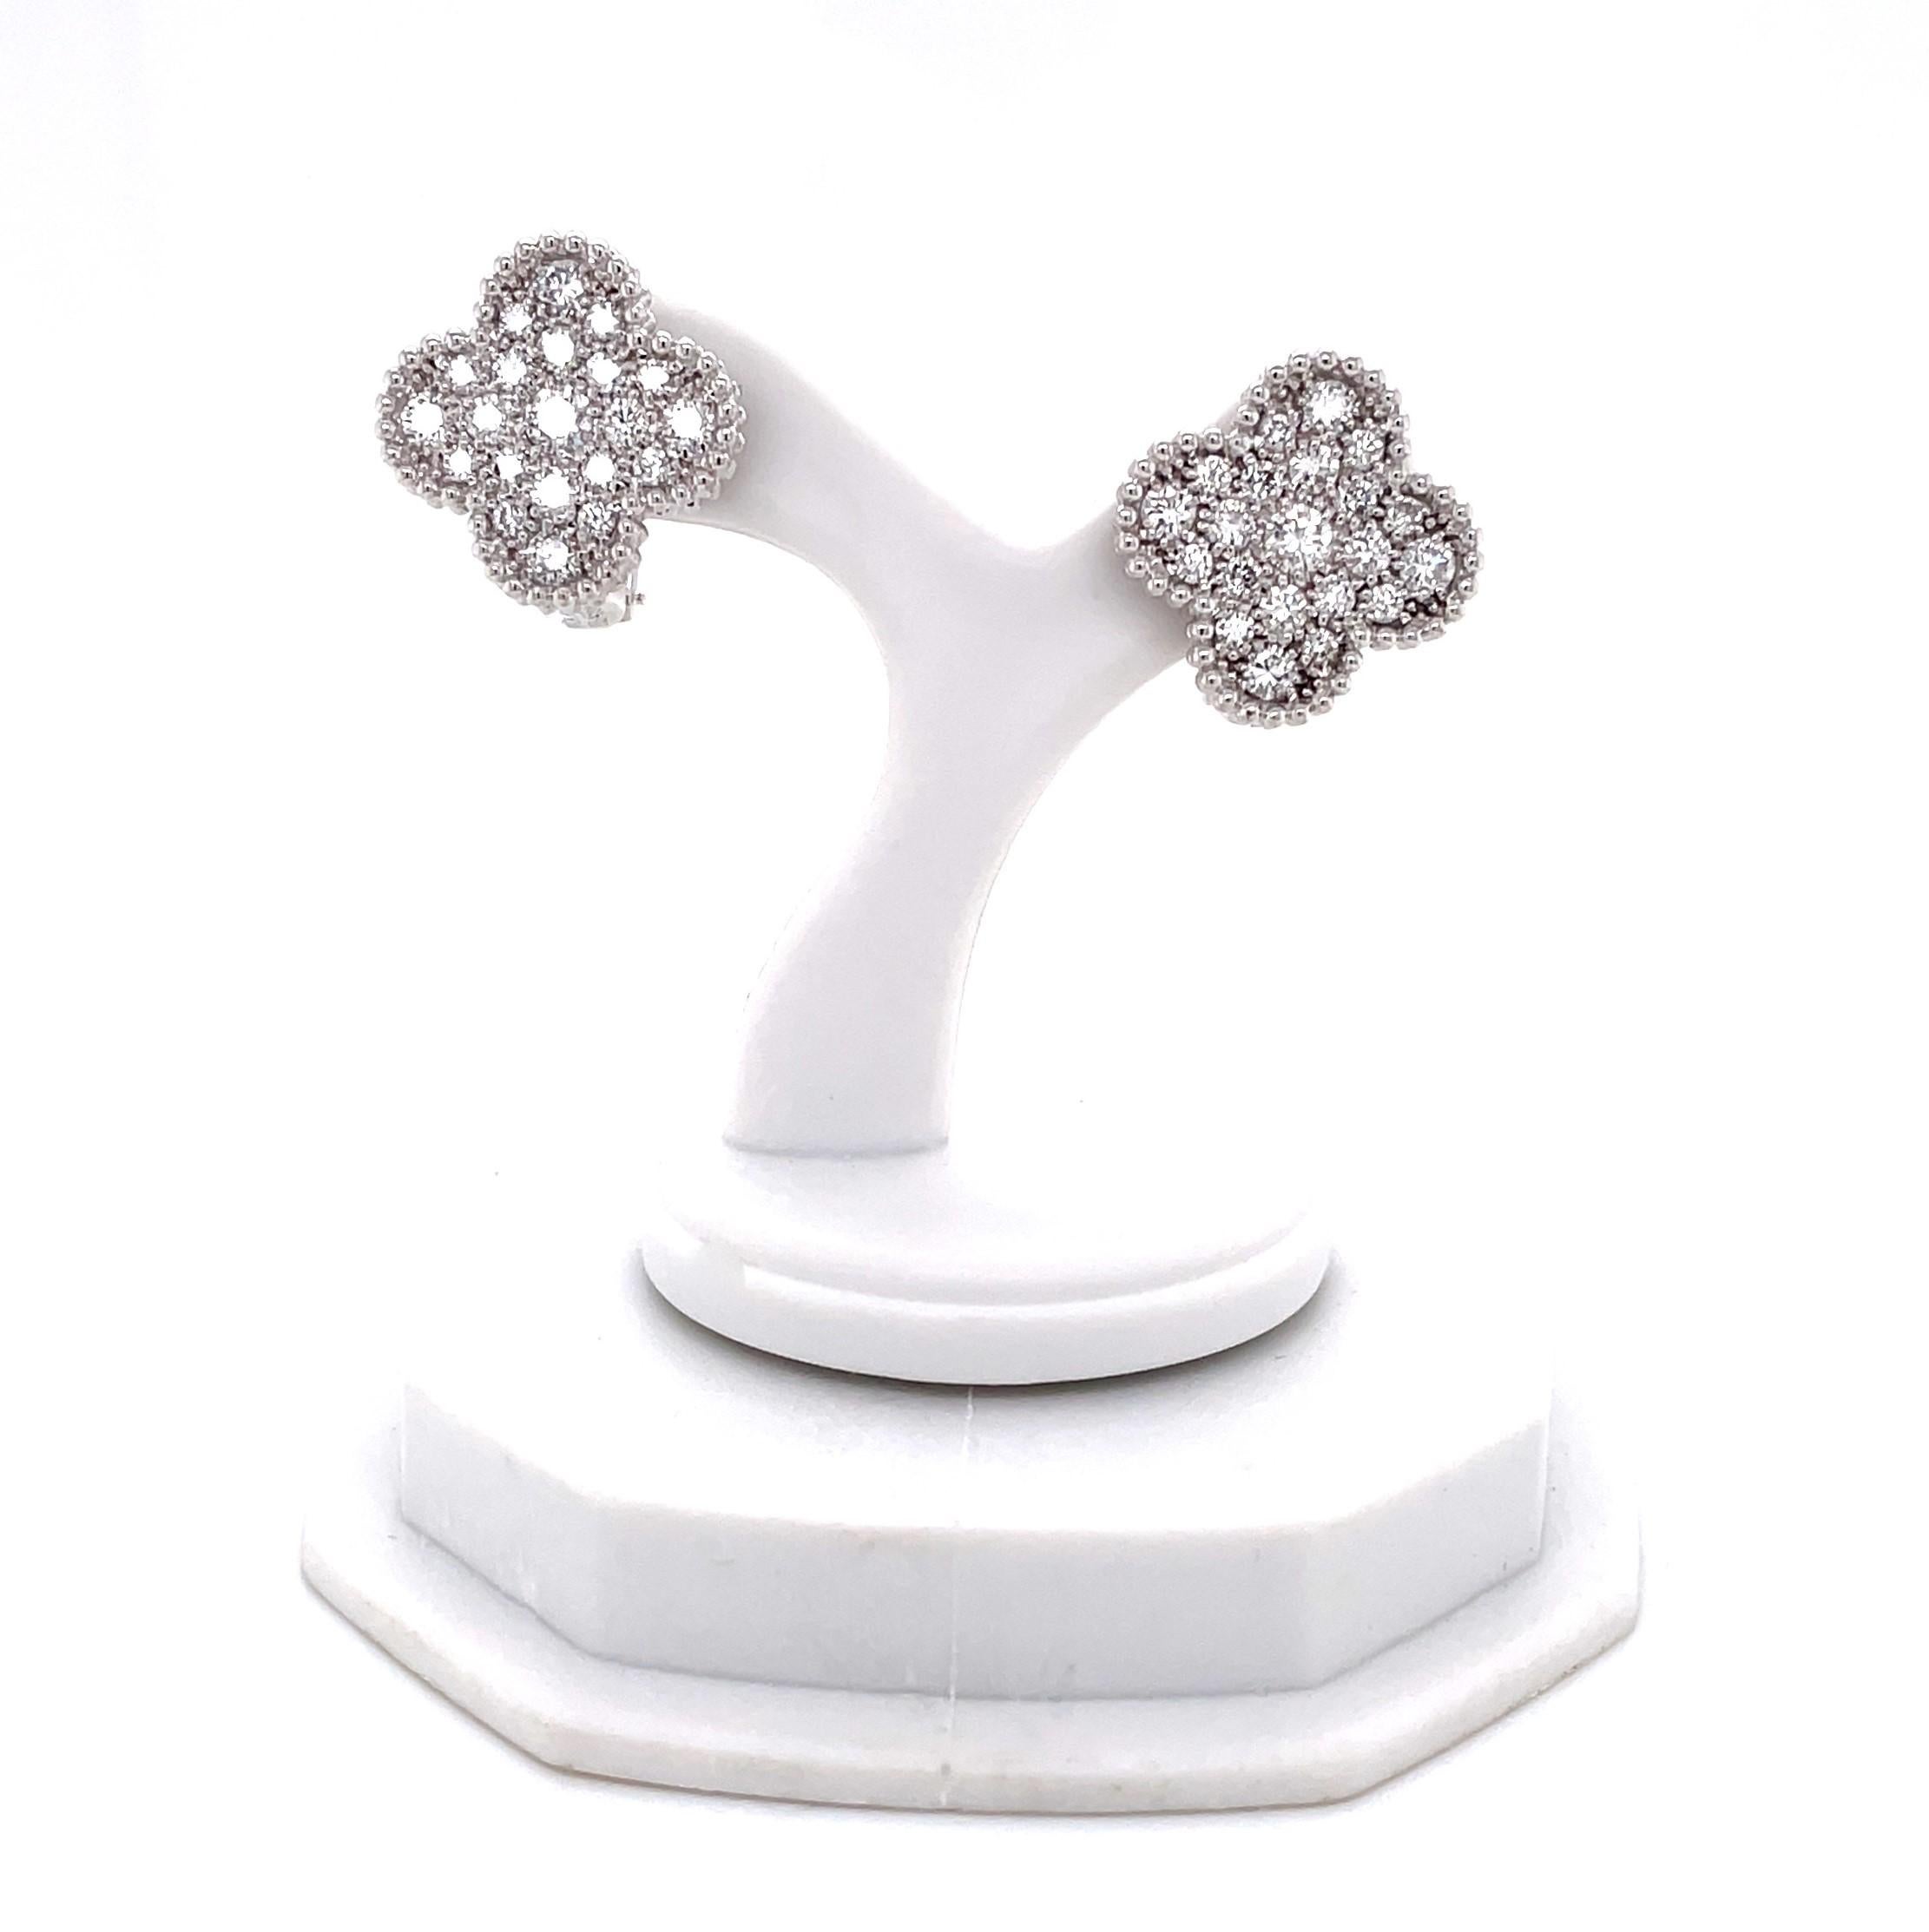 From the iconic Alhambra Collection by Van Cleef & Arpels, enjoy these four leaf clover inspired diamond VCA Alhambra Vintage Size Earring Studs in eighteen karat 18K white gold. Covered with 42 round faceted full cut white F/VS diamonds, the pair